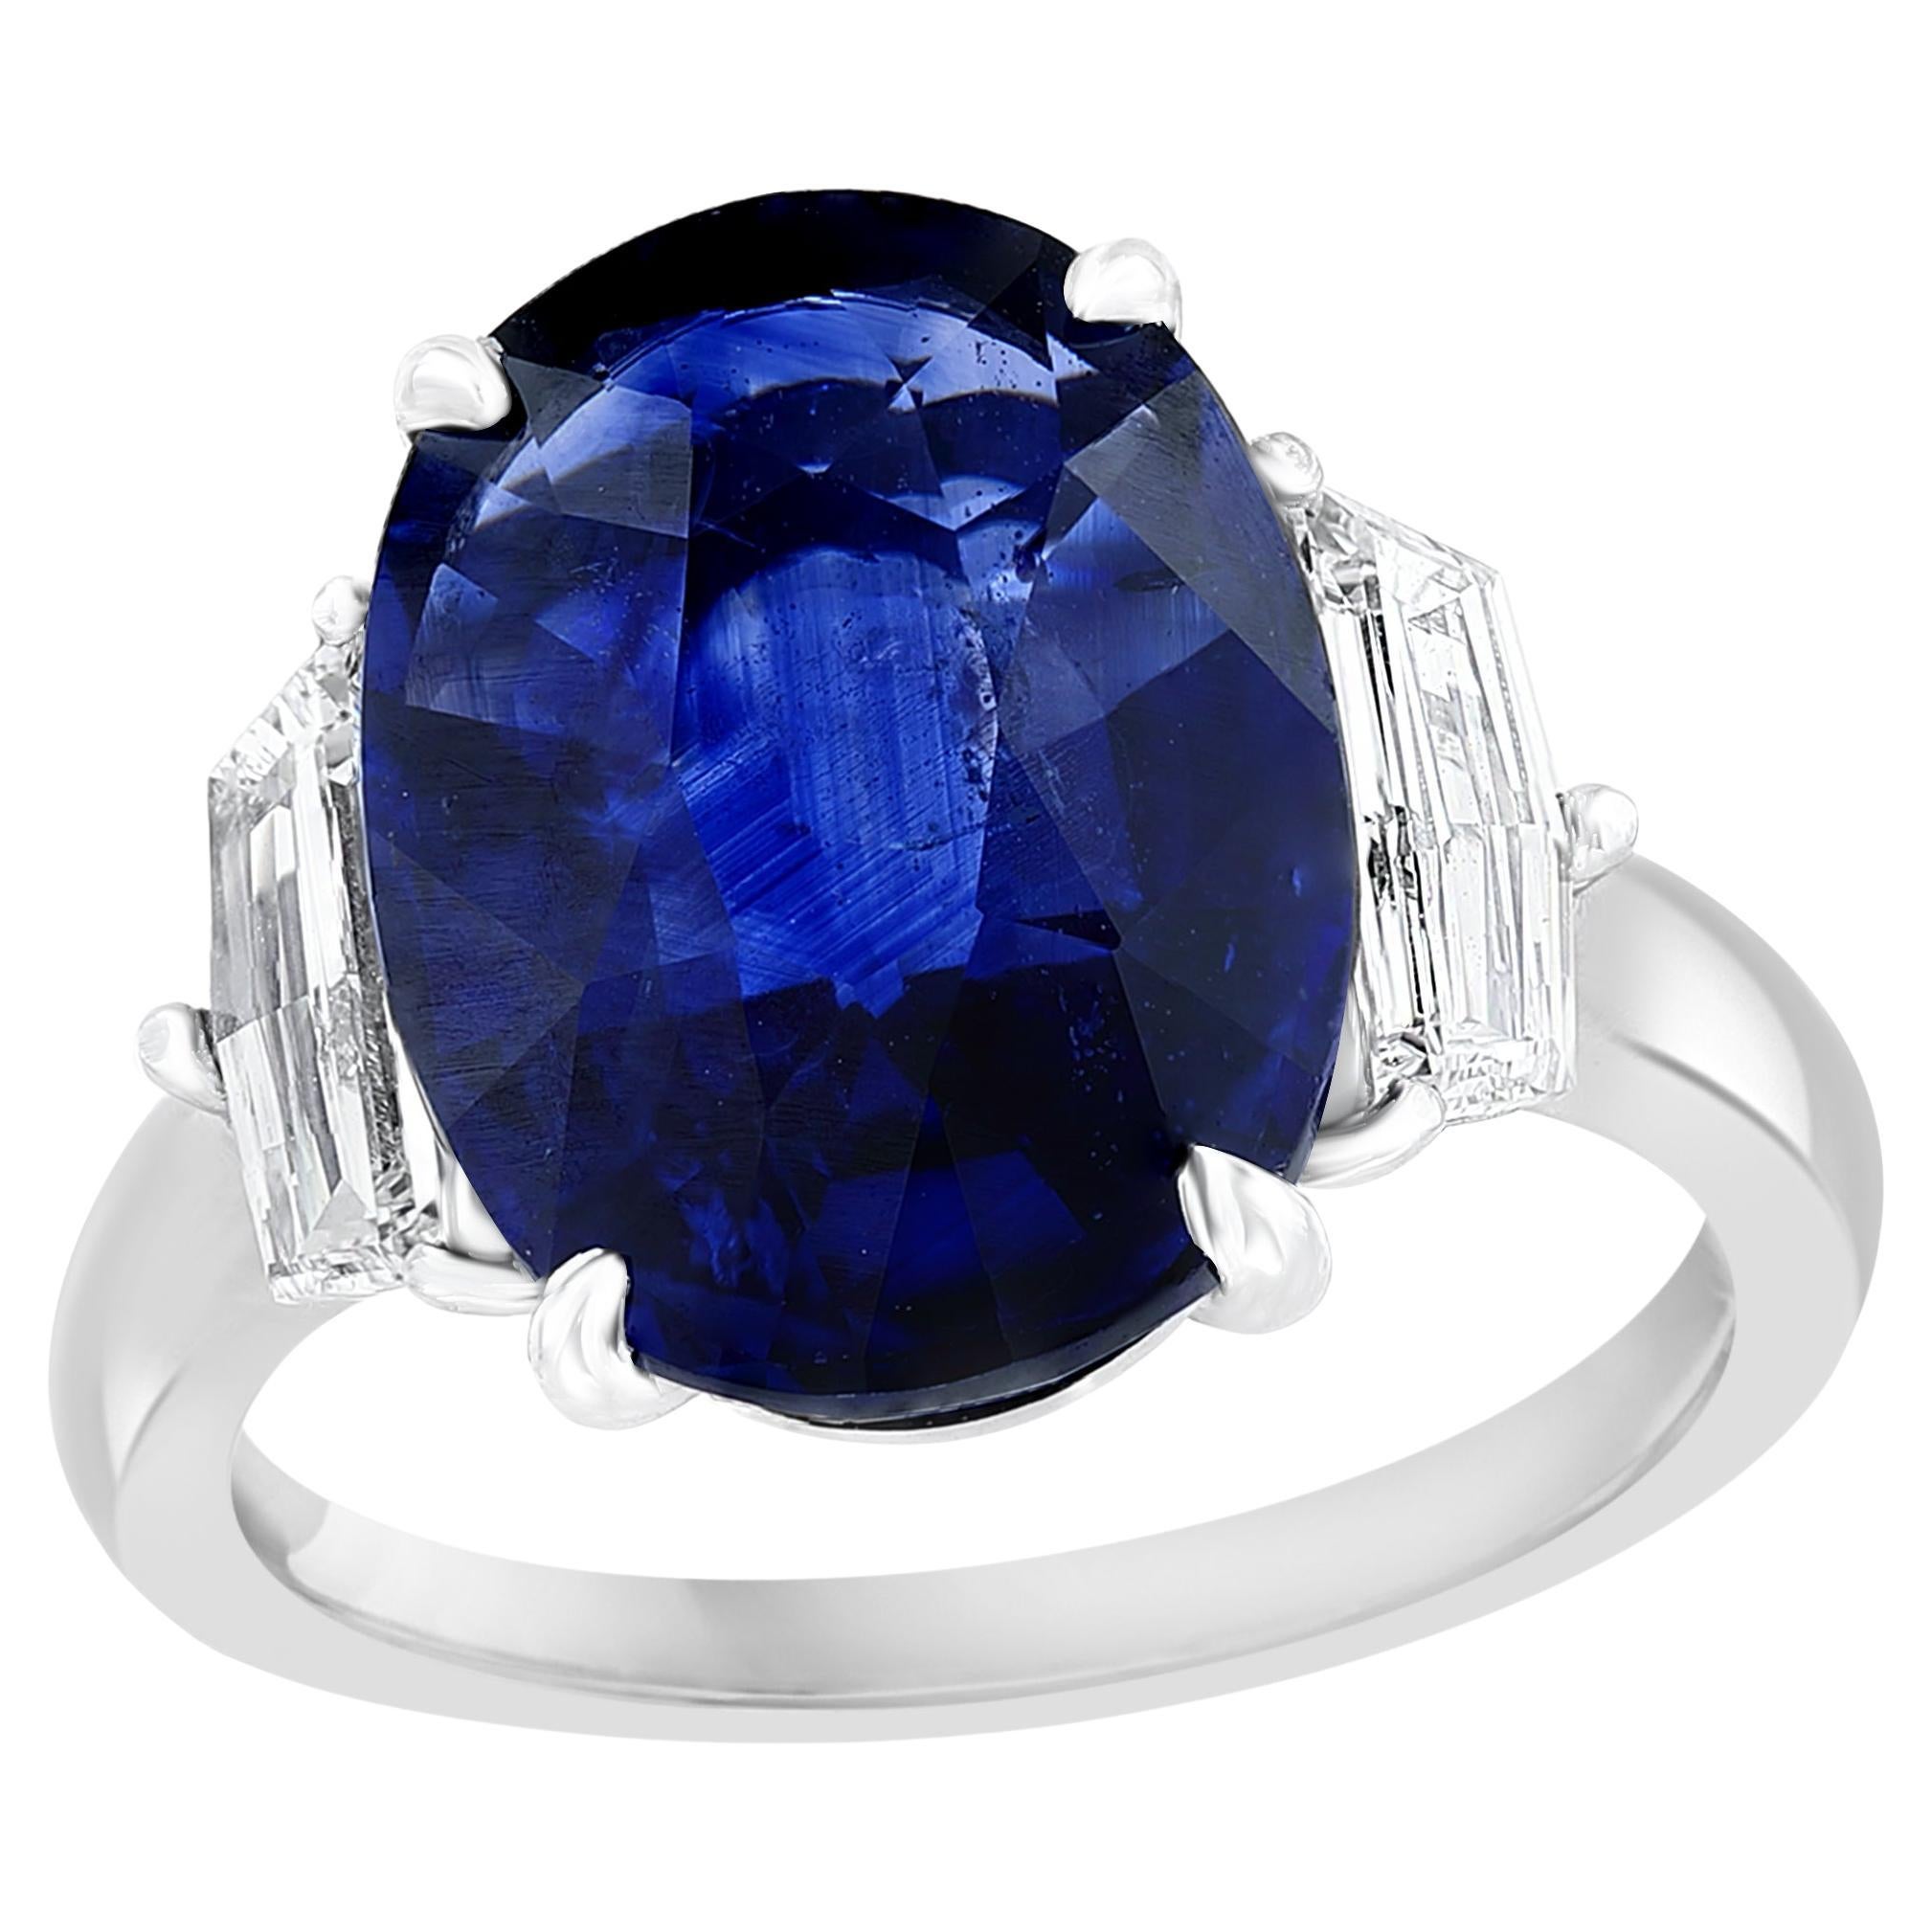 6.61 Carat Oval Cut Sapphire and Diamond Engagement Ring in Platinum